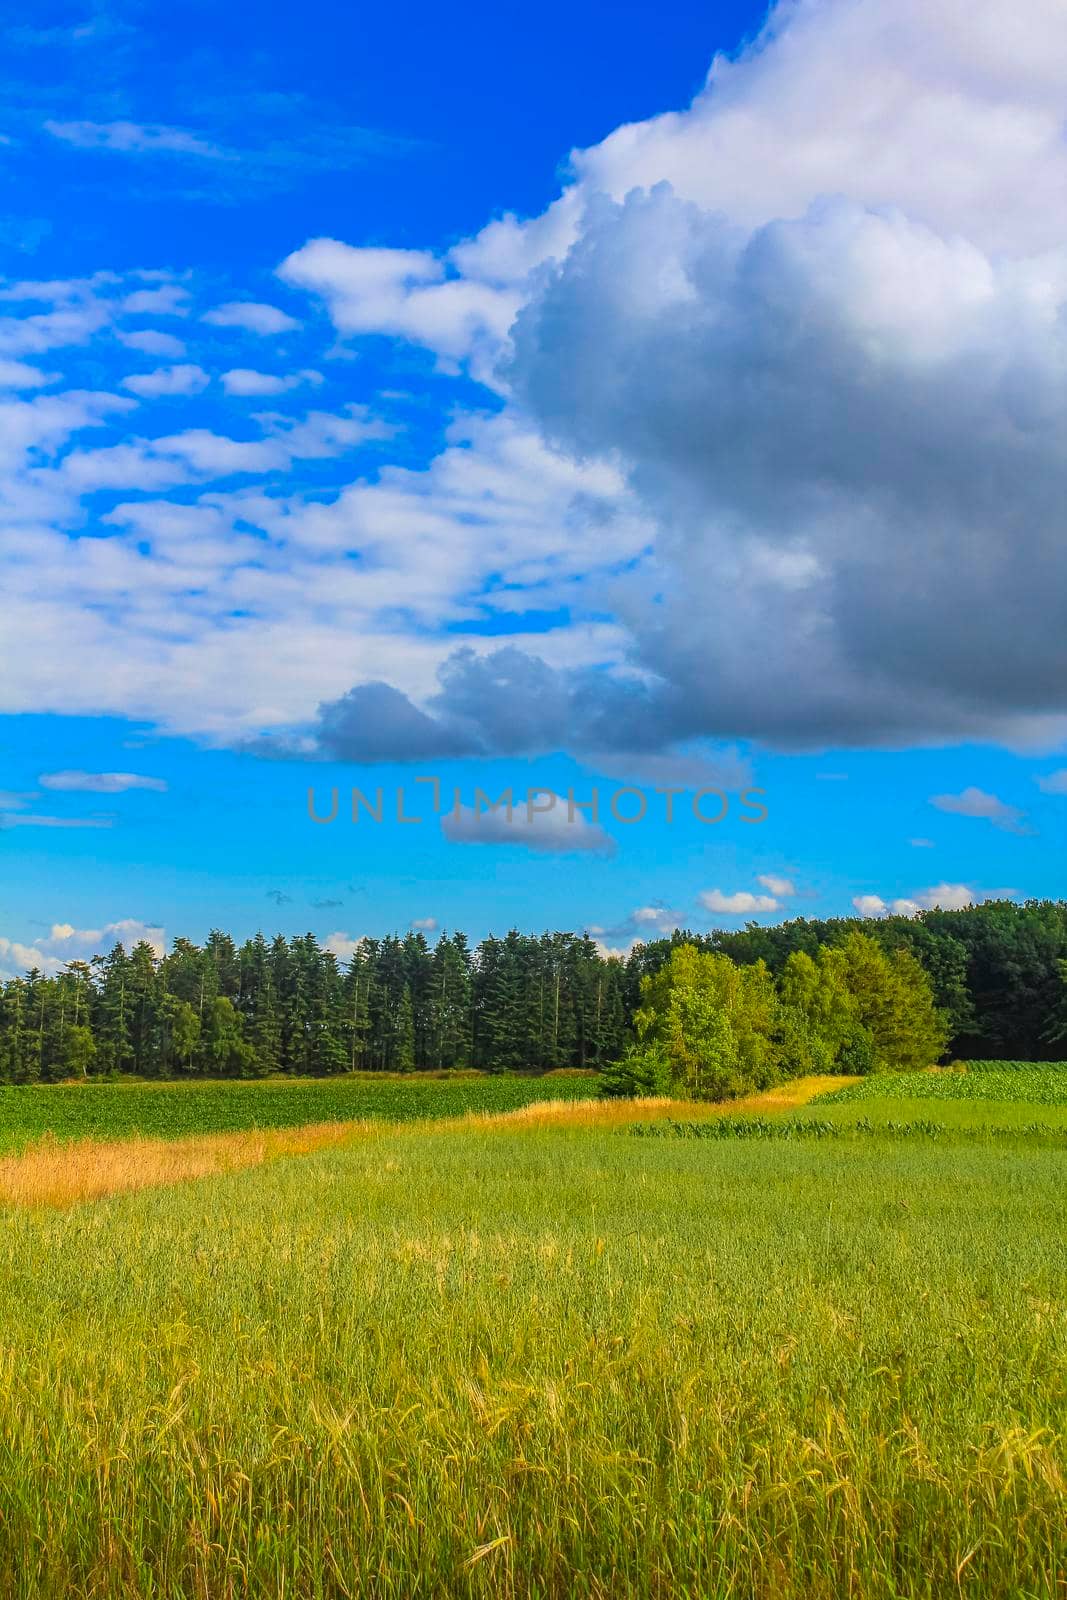 North German agricultural field forest and nature landscape panorama in Hemmoor Hechthausen Cuxhaven Lower Saxony Germany.